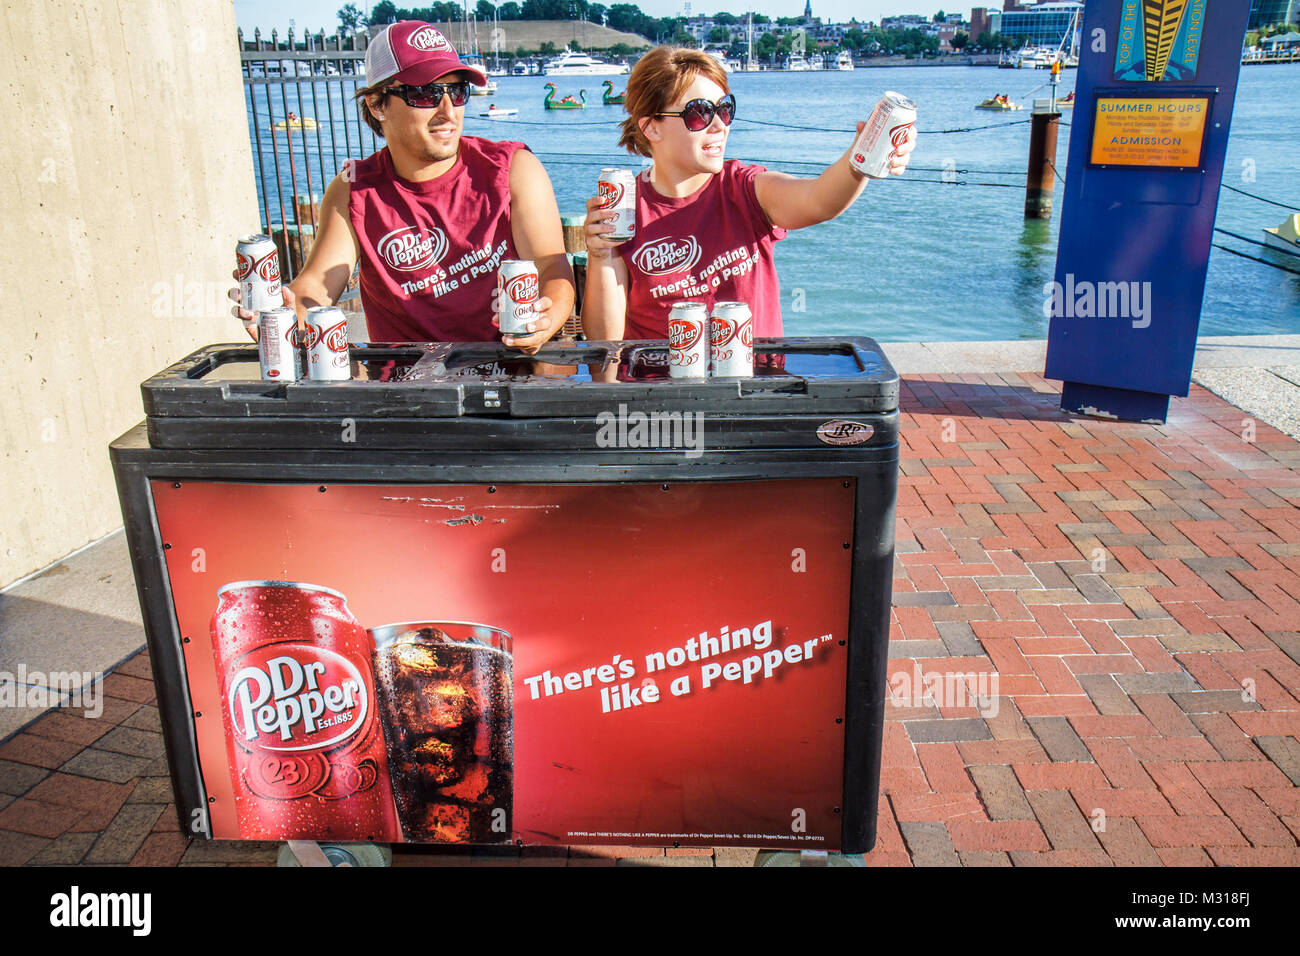 Baltimore Maryland,Inner Harbor,harbour,waterfront,Harborplace,festival marketplace,free sample samples,product,Dr. Pepper,product marketing,ad,advert Stock Photo